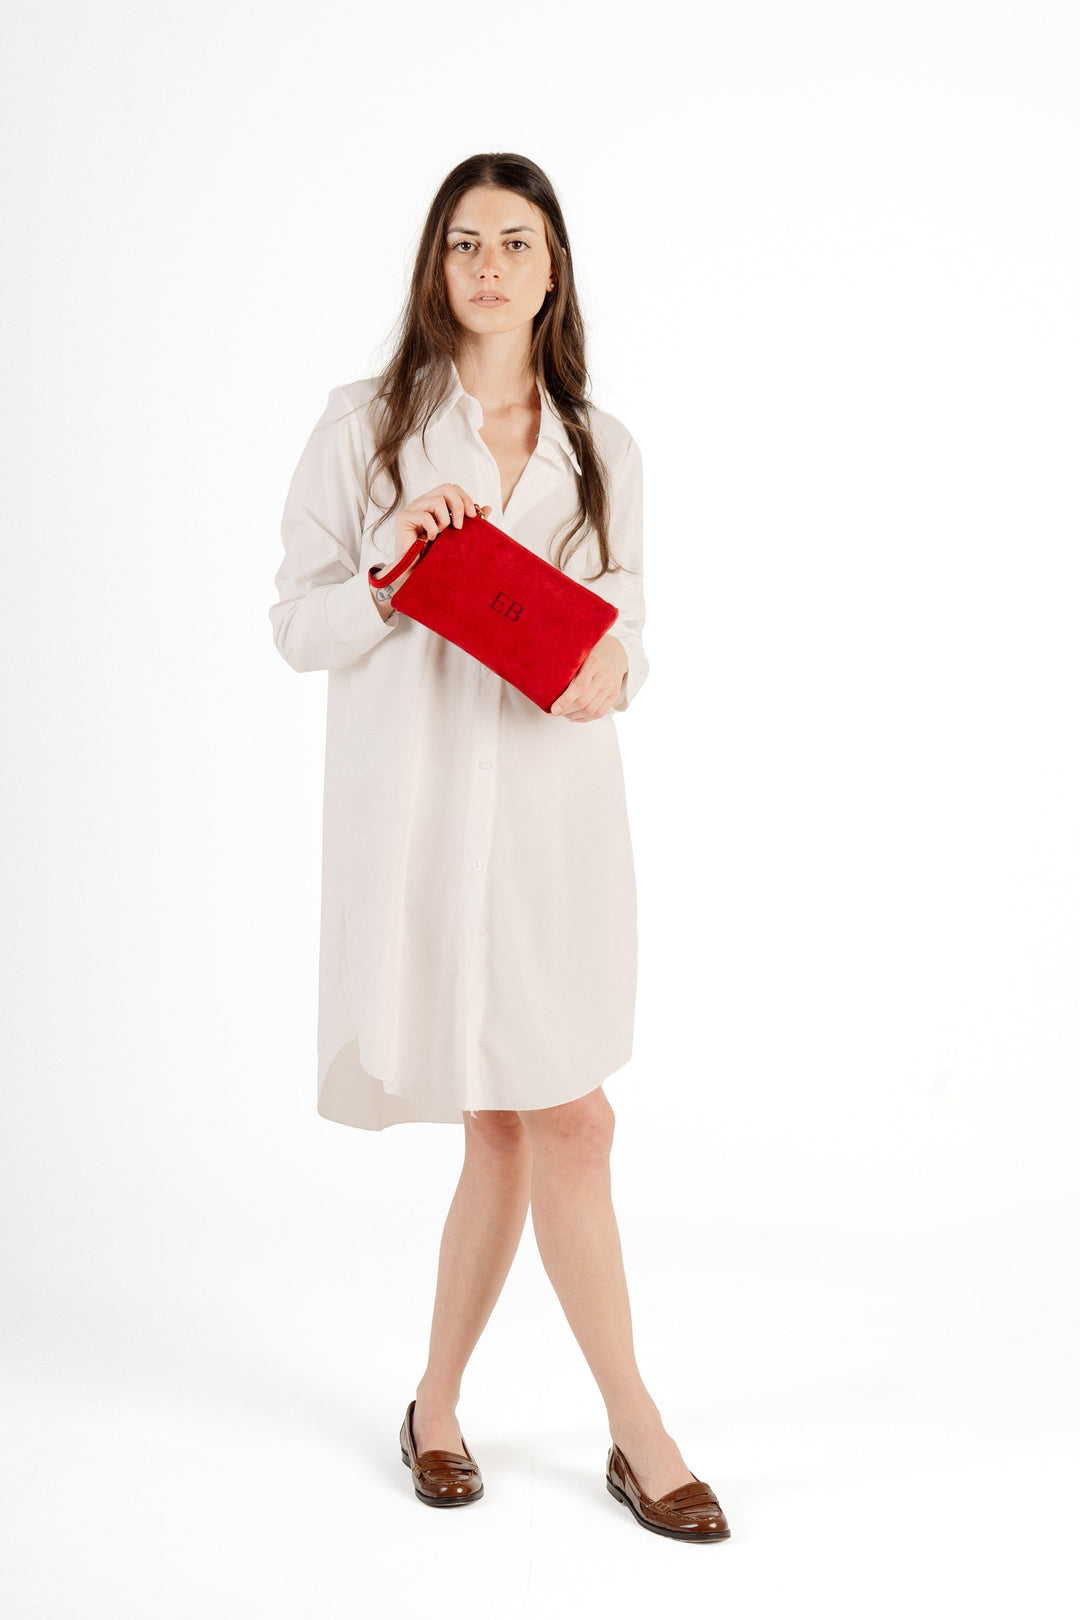 Woman in white dress holding red clutch purse on white background